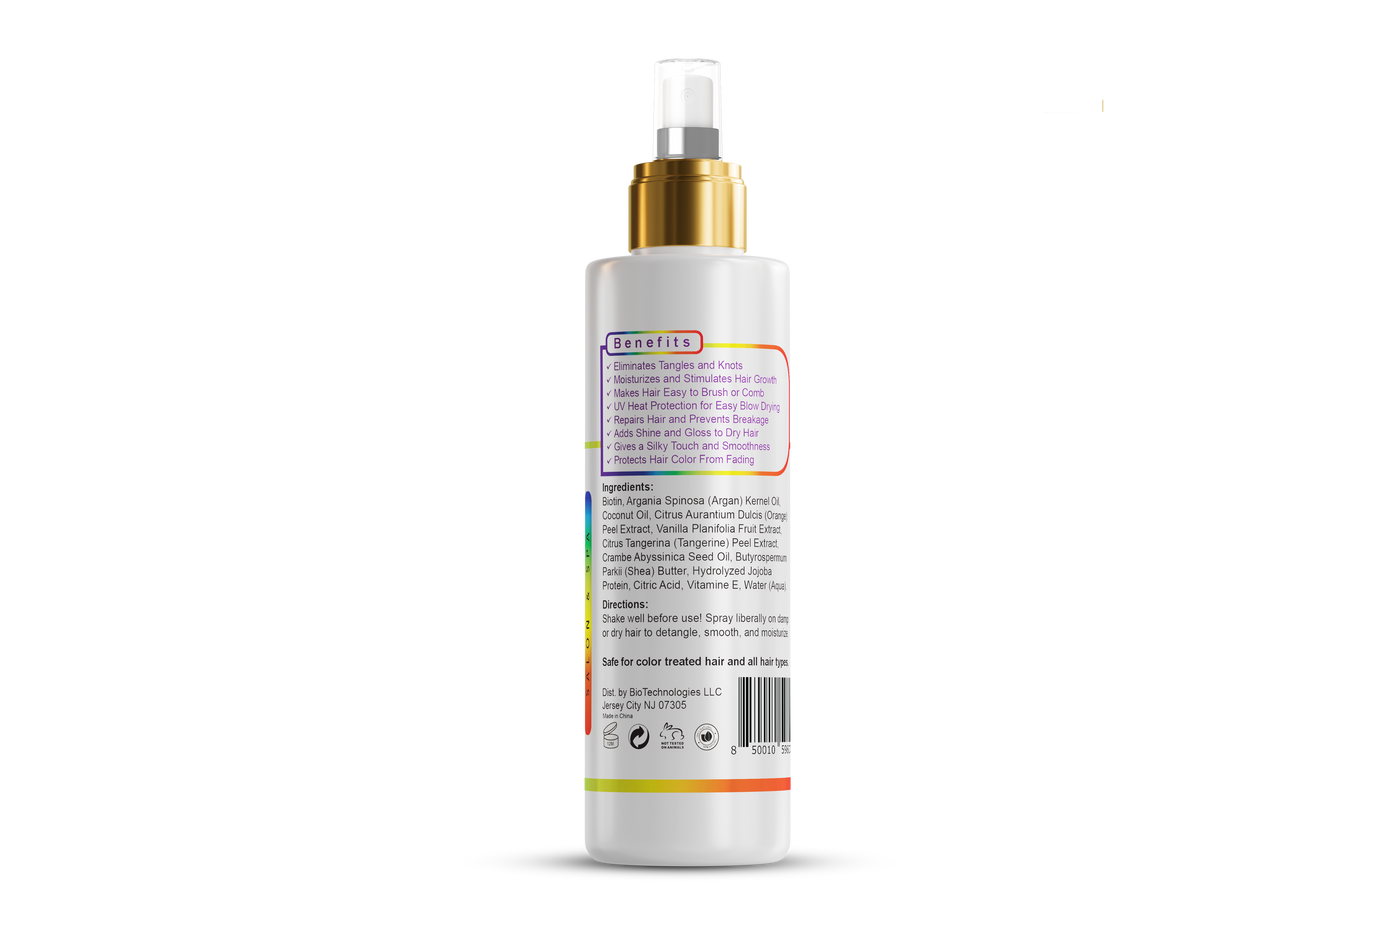 GrowFinity Hair Growth Detangling Spray and Leave-in Conditioner